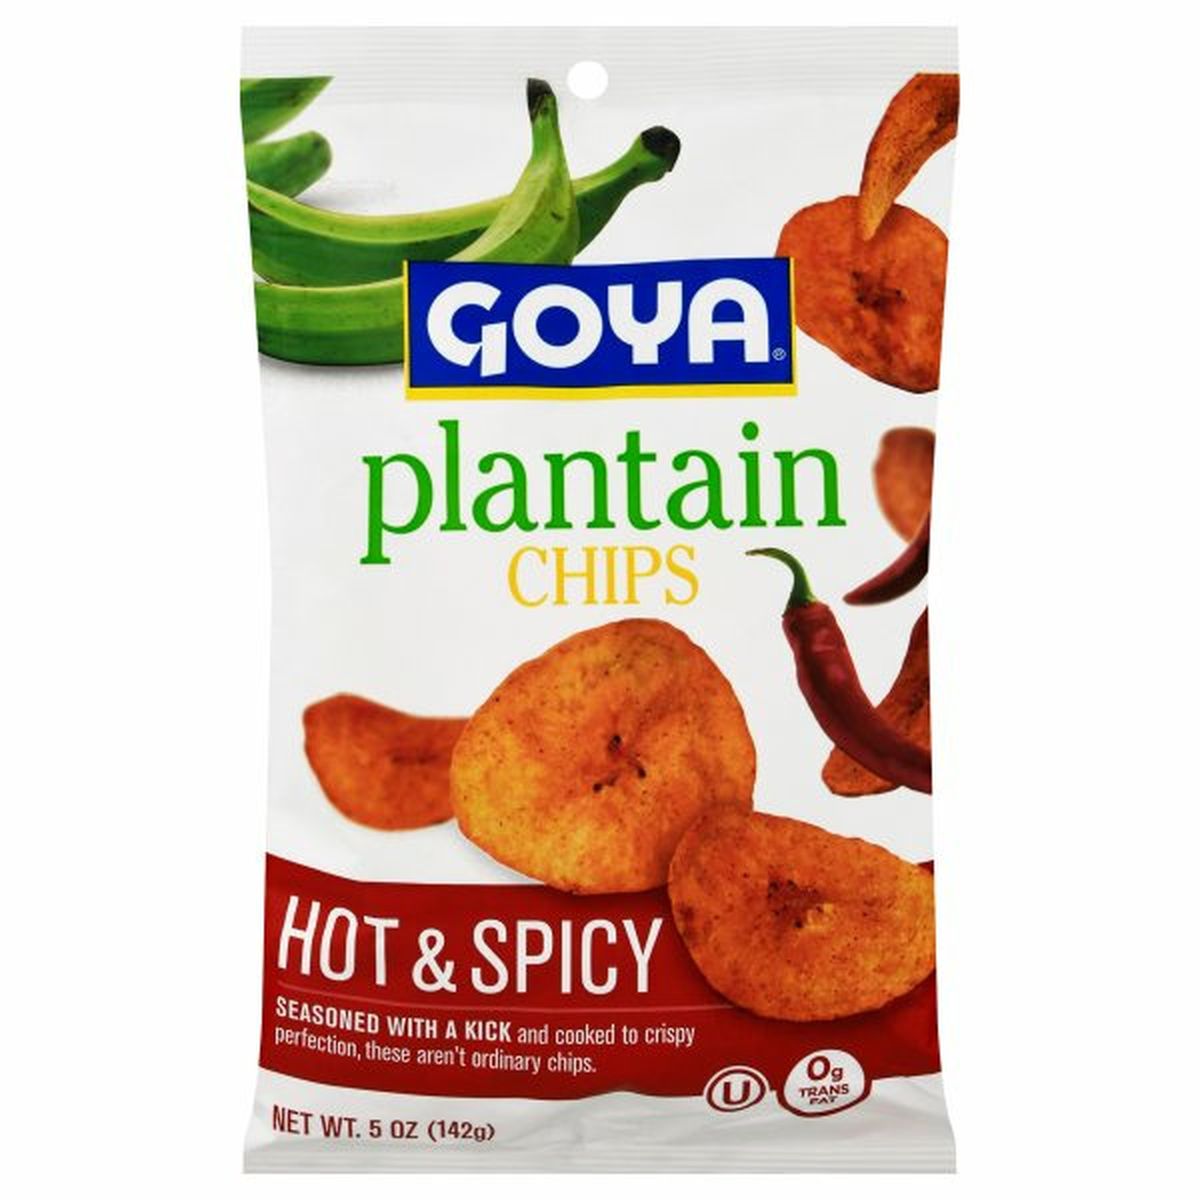 Calories in Goya Plantain Chips, Hot & Spicy